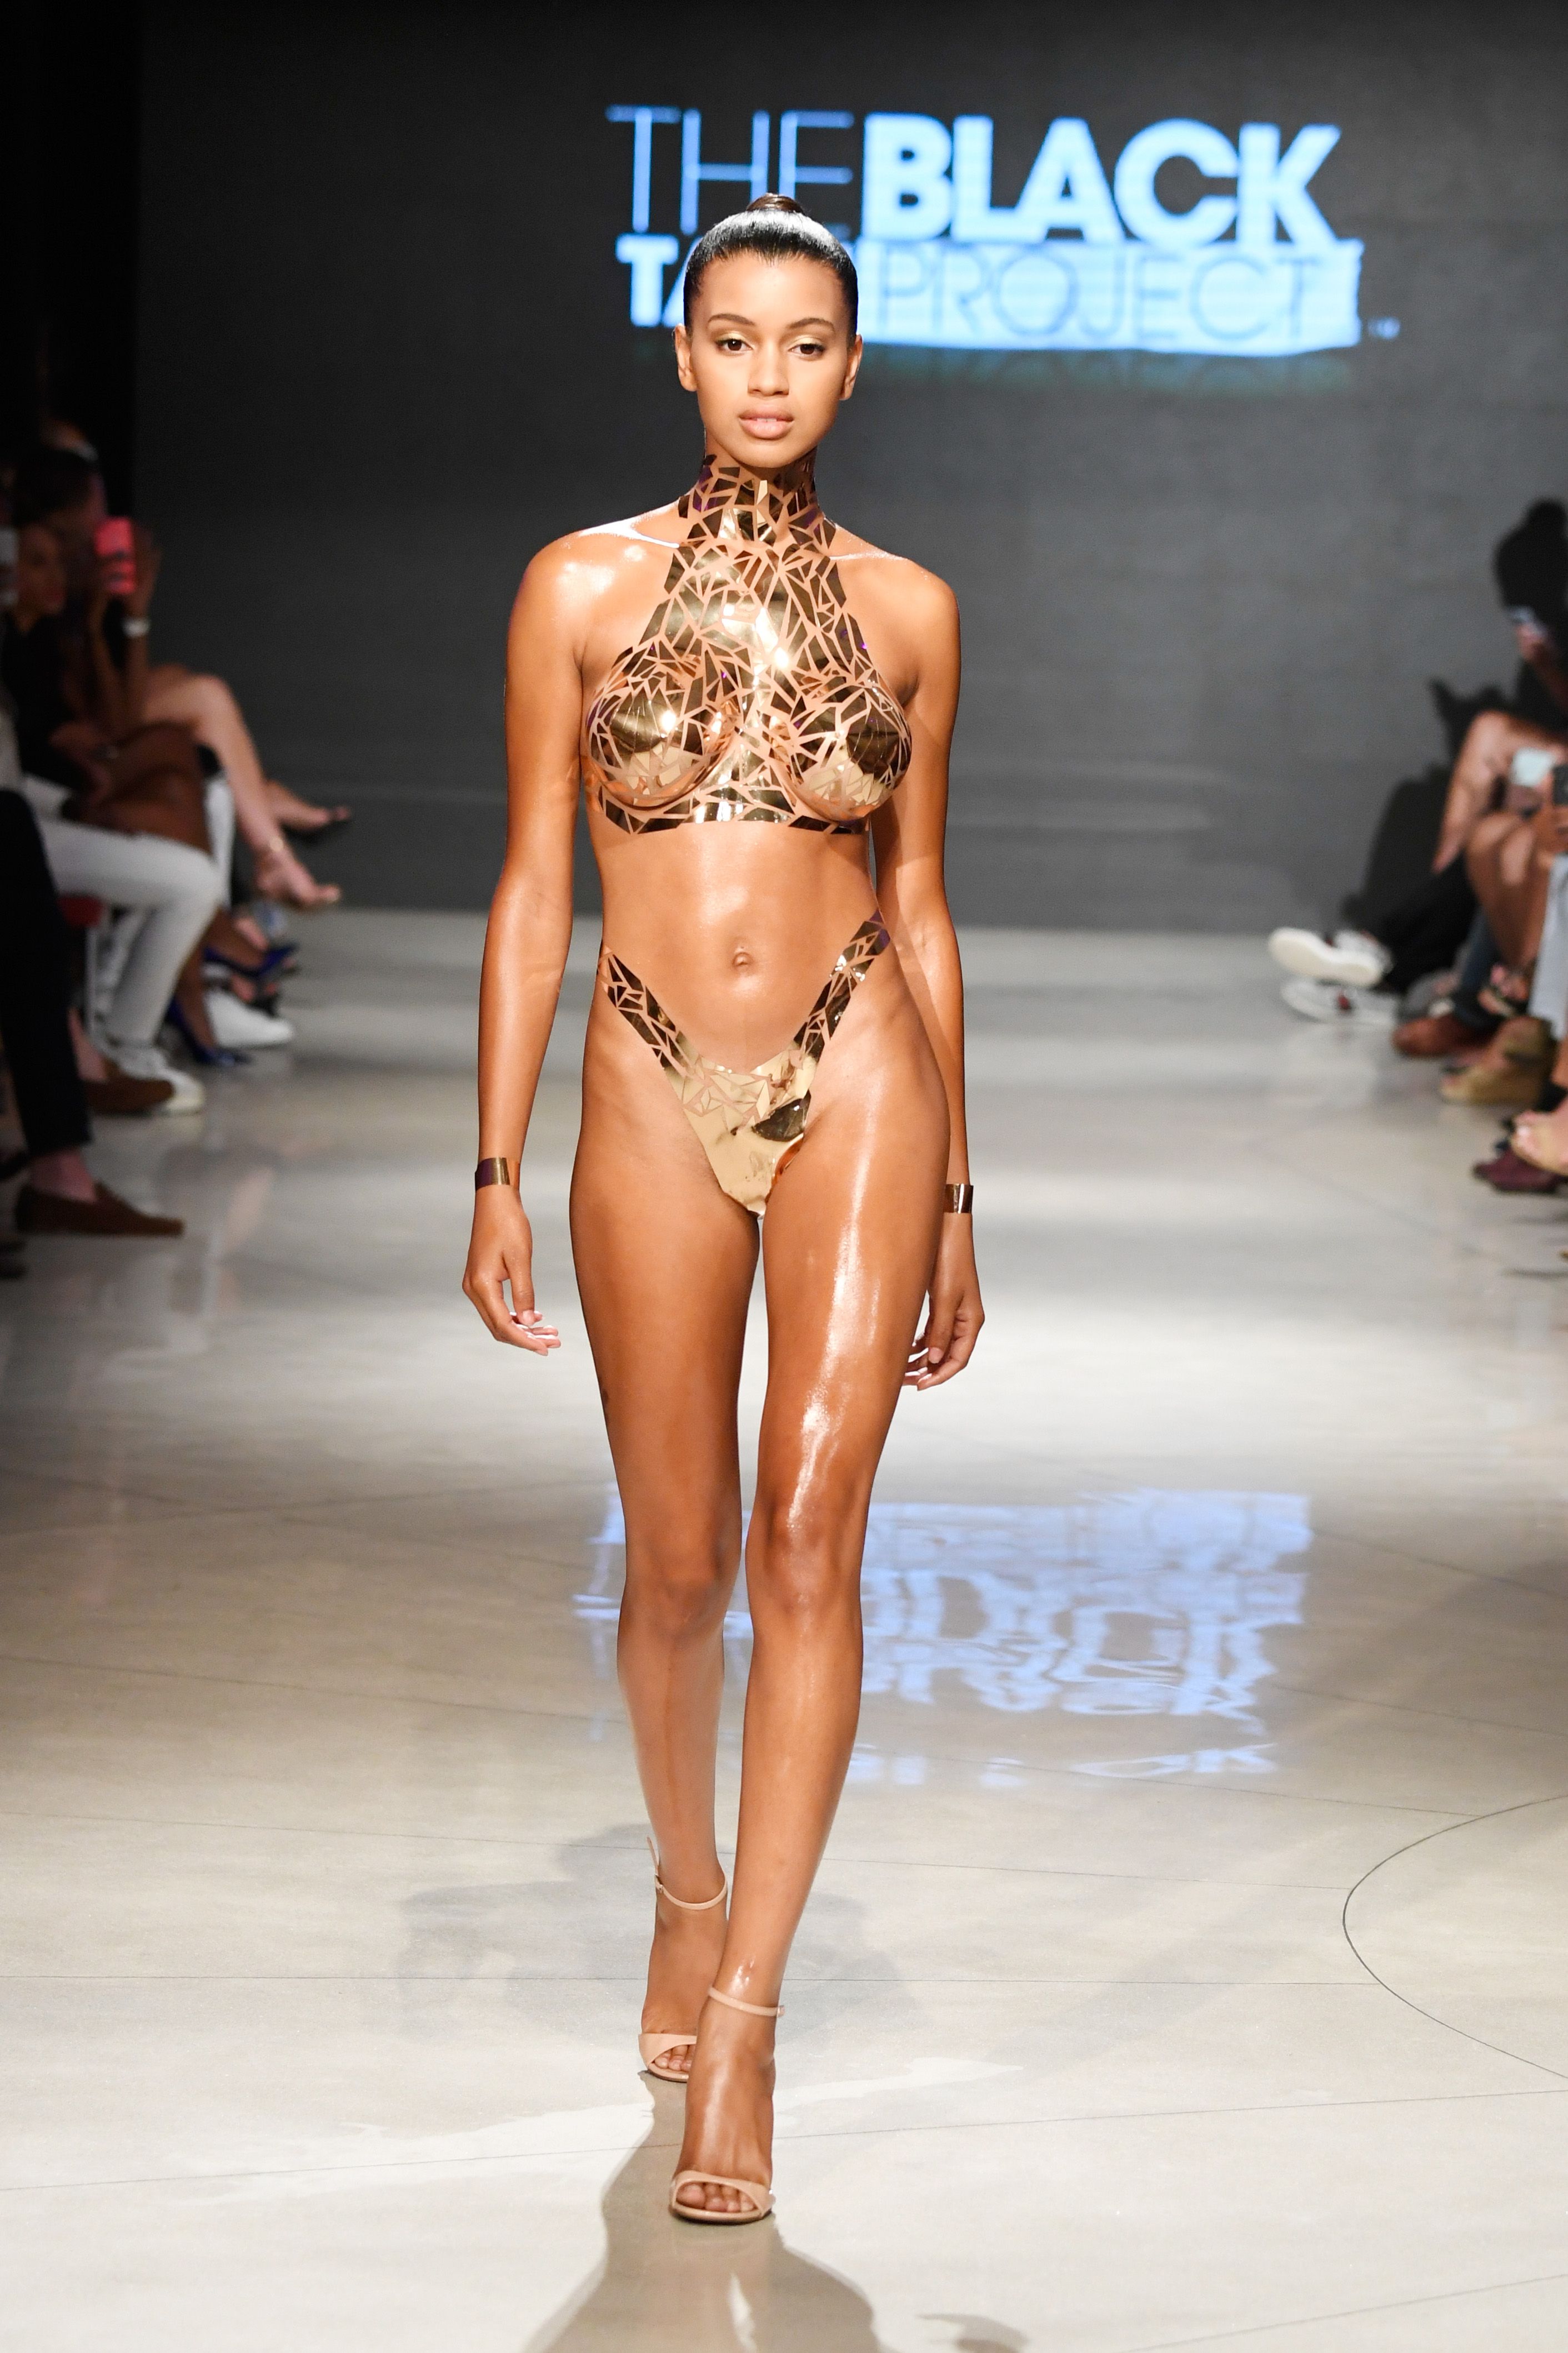 Nearly Naked Metallic Tape Swimsuits Exist - All About the Black Tape  Project Maimi Swim Week Show